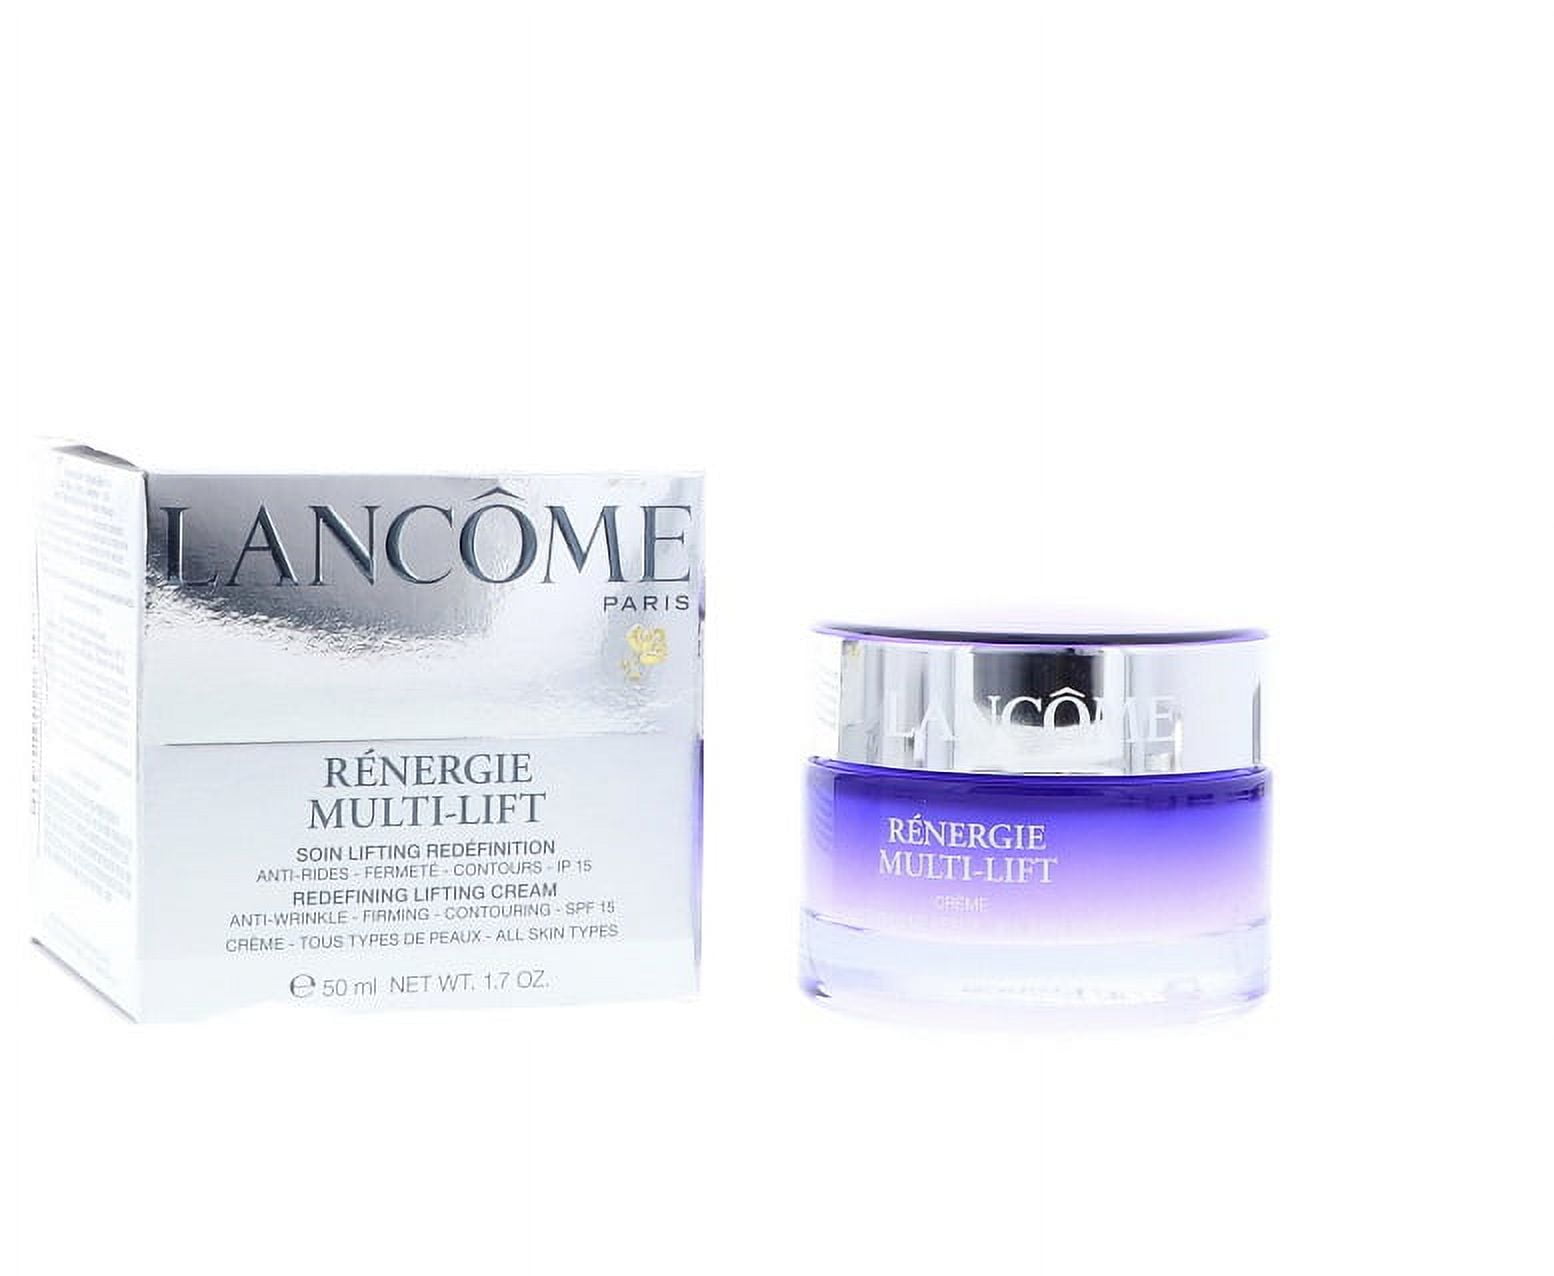 Skin for Lancome All 1.7 oz Types, Renergie Multi-Lift Cream